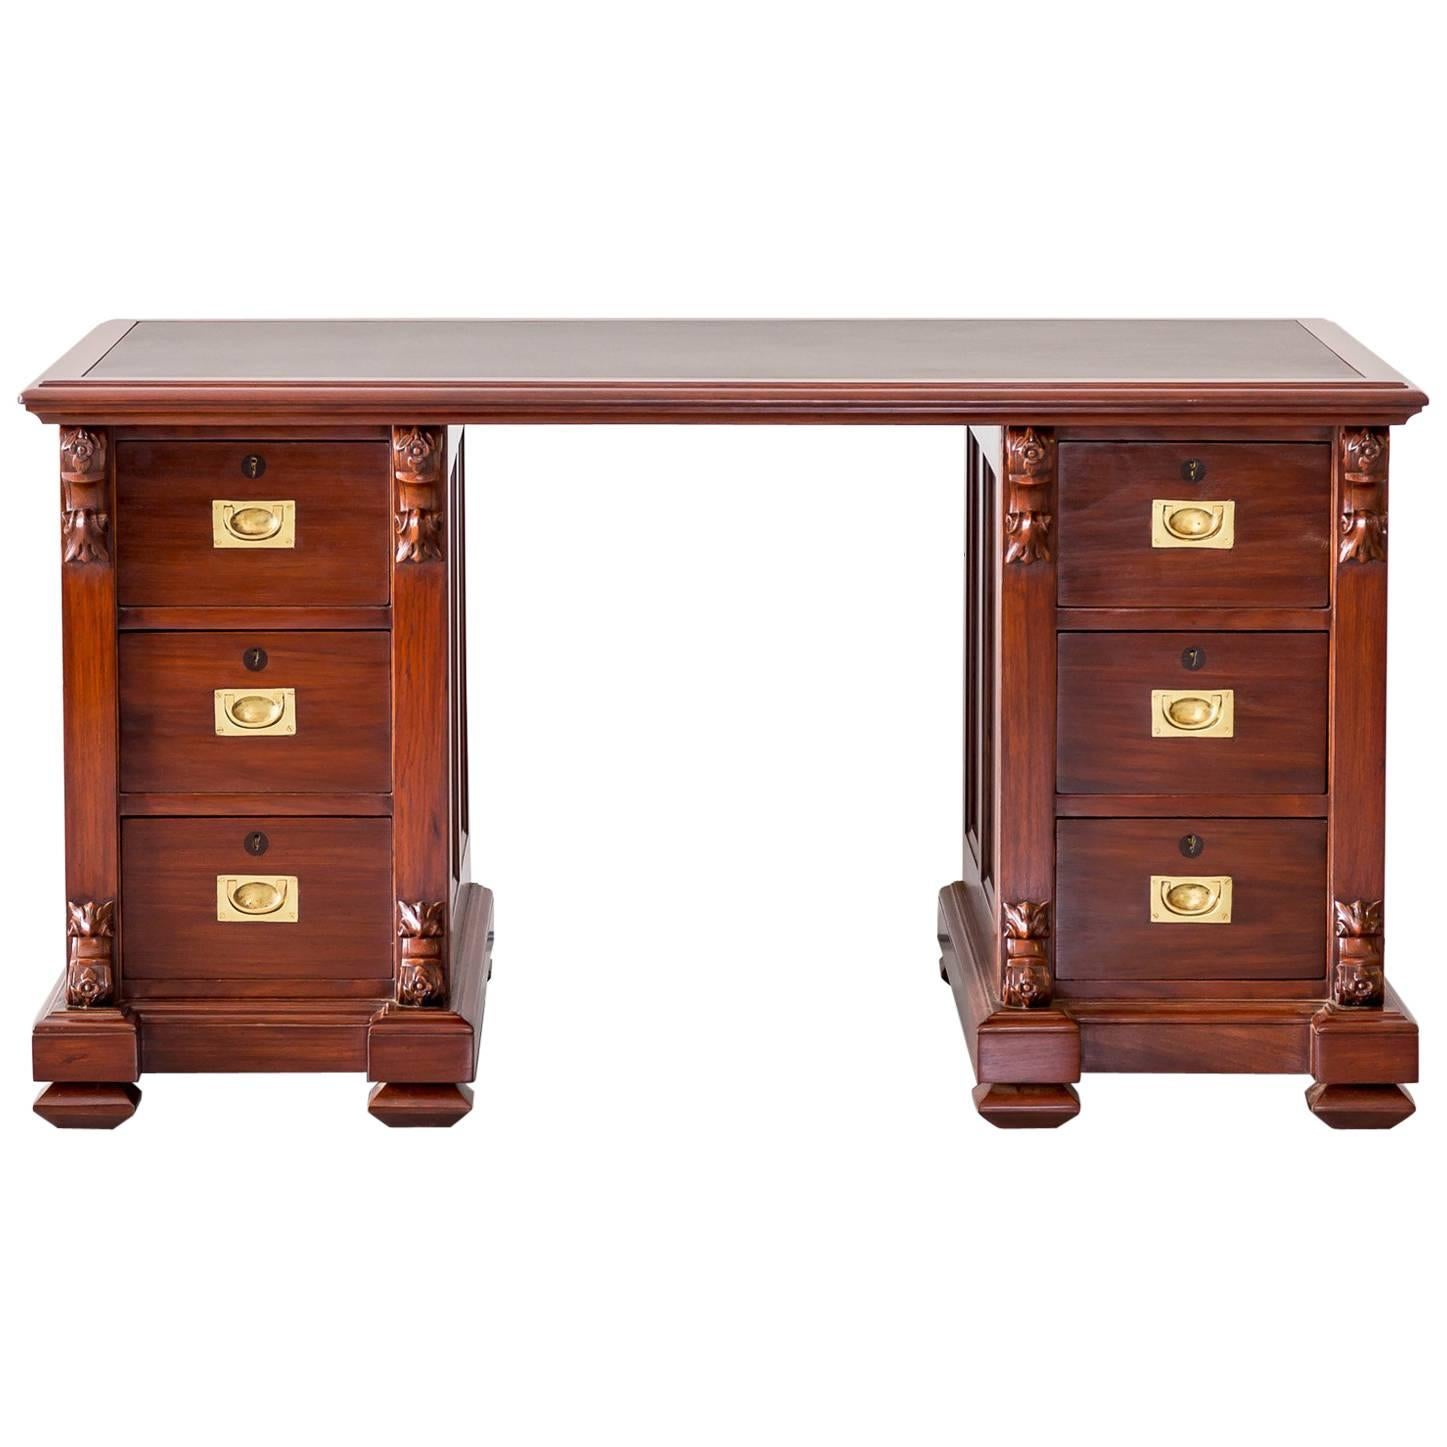 Antique Anglo-Indian or British Colonial Mahogany Pedestal Desk For Sale